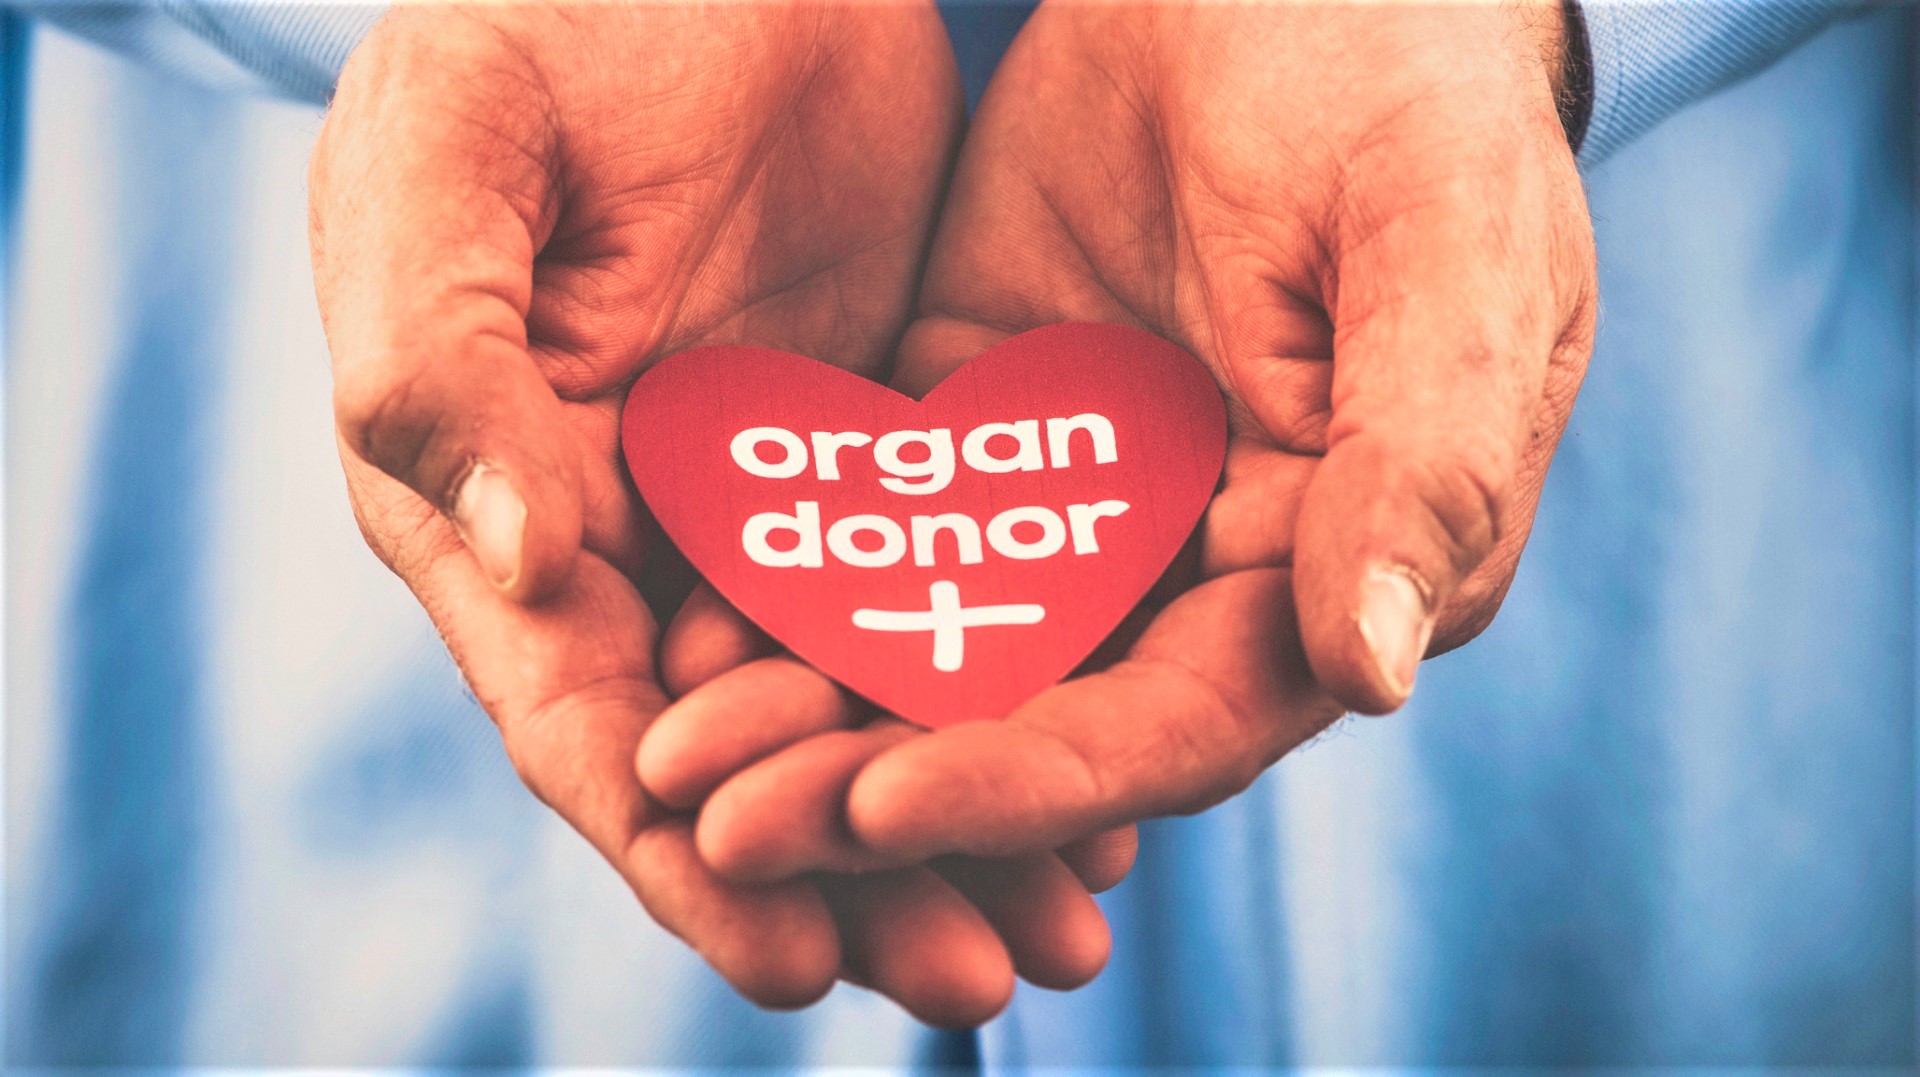 organ-donation-rules-regulations-in-india